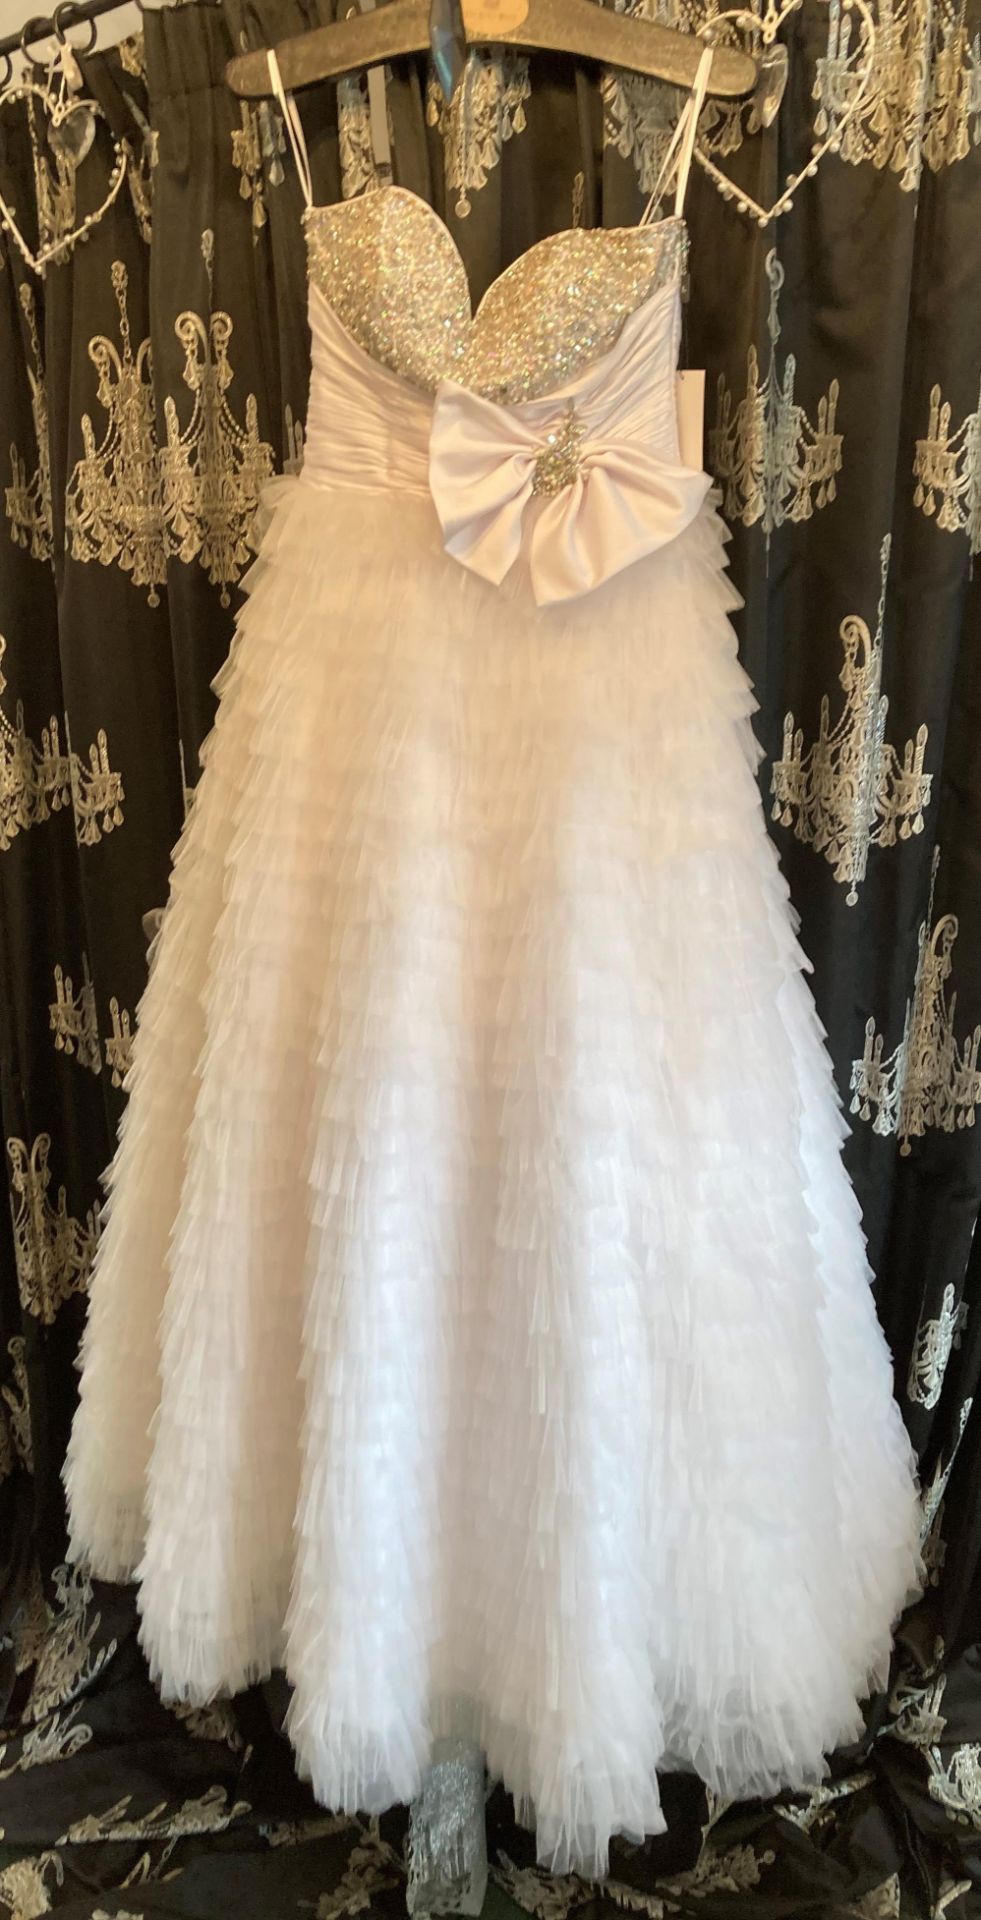 White A-line gown, size UK 12.